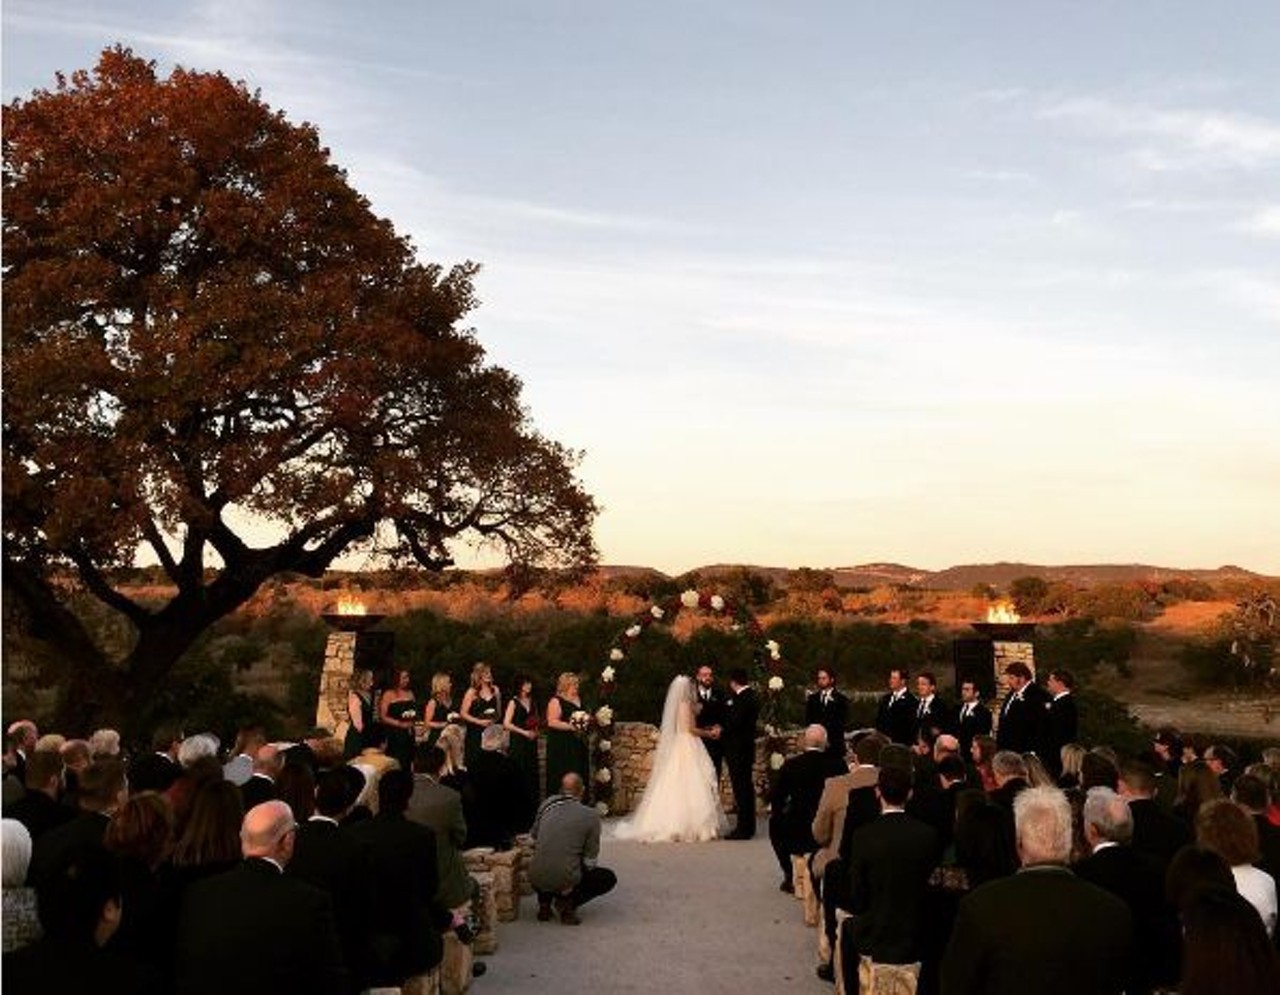 Paniolo Ranch
As if the stone benches guests sit on during the ceremony aren&#146;t gorgeous enough, the clear view of the Texas sky will make your wedding all the more memorable.
1510 Ranch Rd 473, Boerne, panioloranch.com
Photo via Instagram, allinthedetailsevents